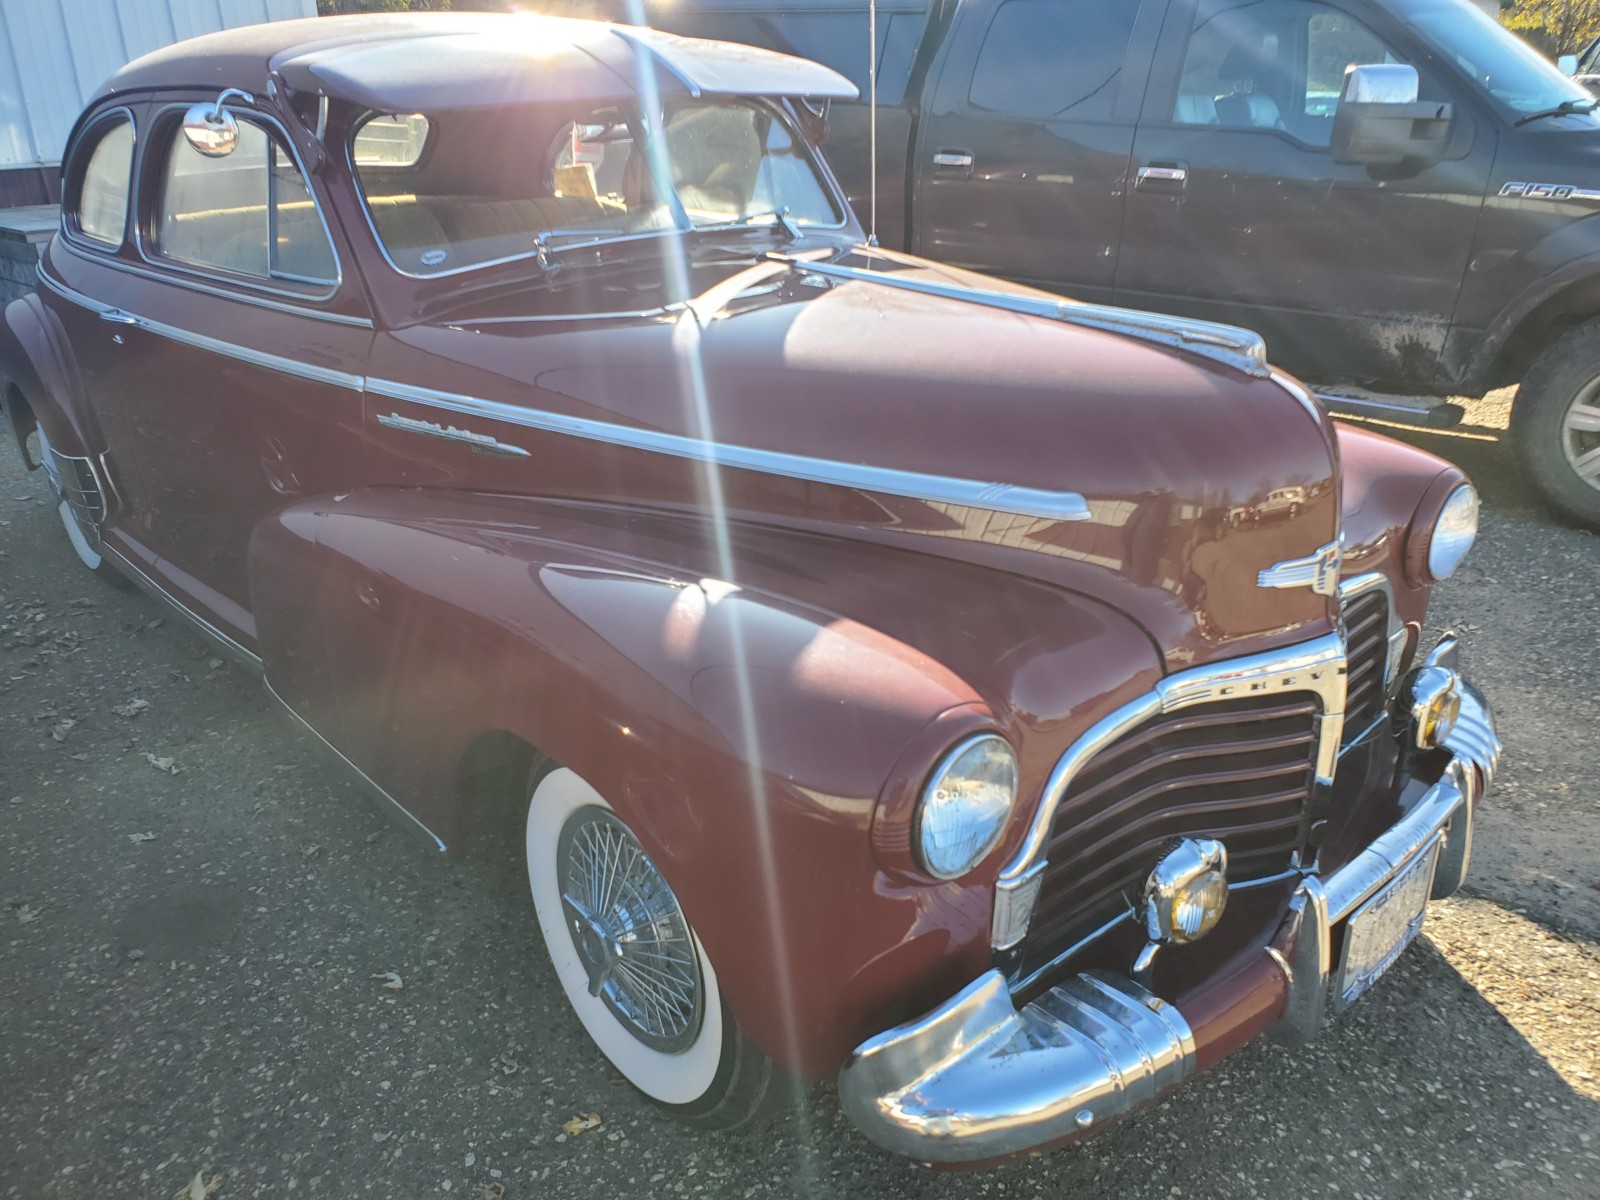 1942 Chevrolet Coupe